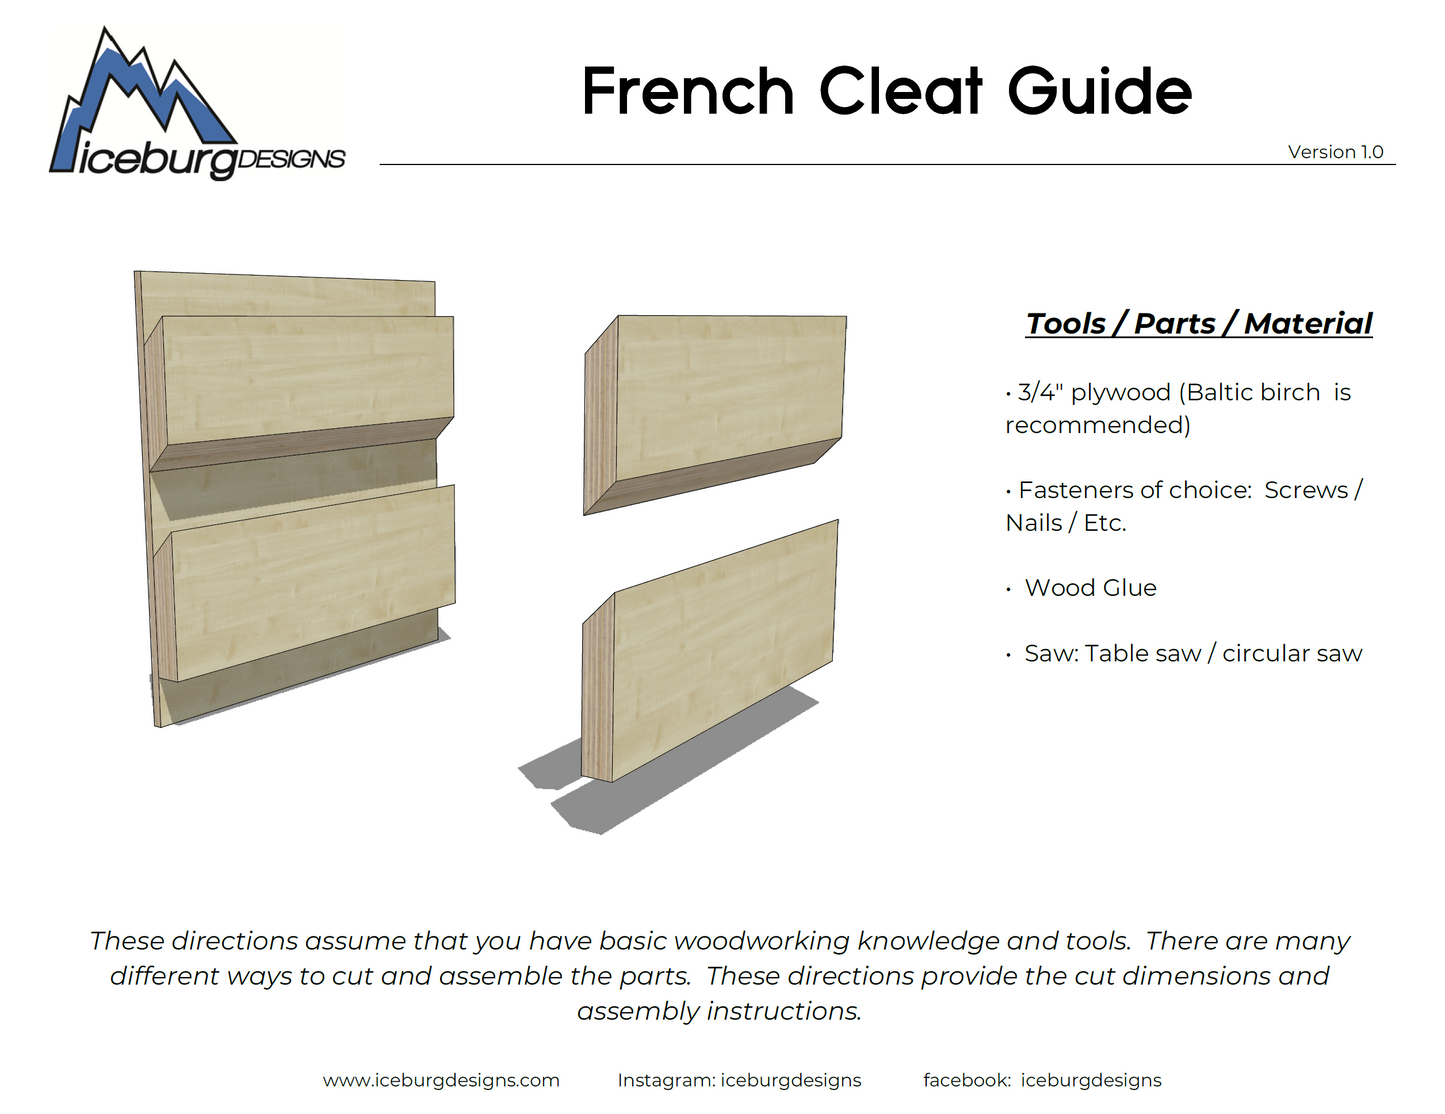 French Cleat Wall Plans